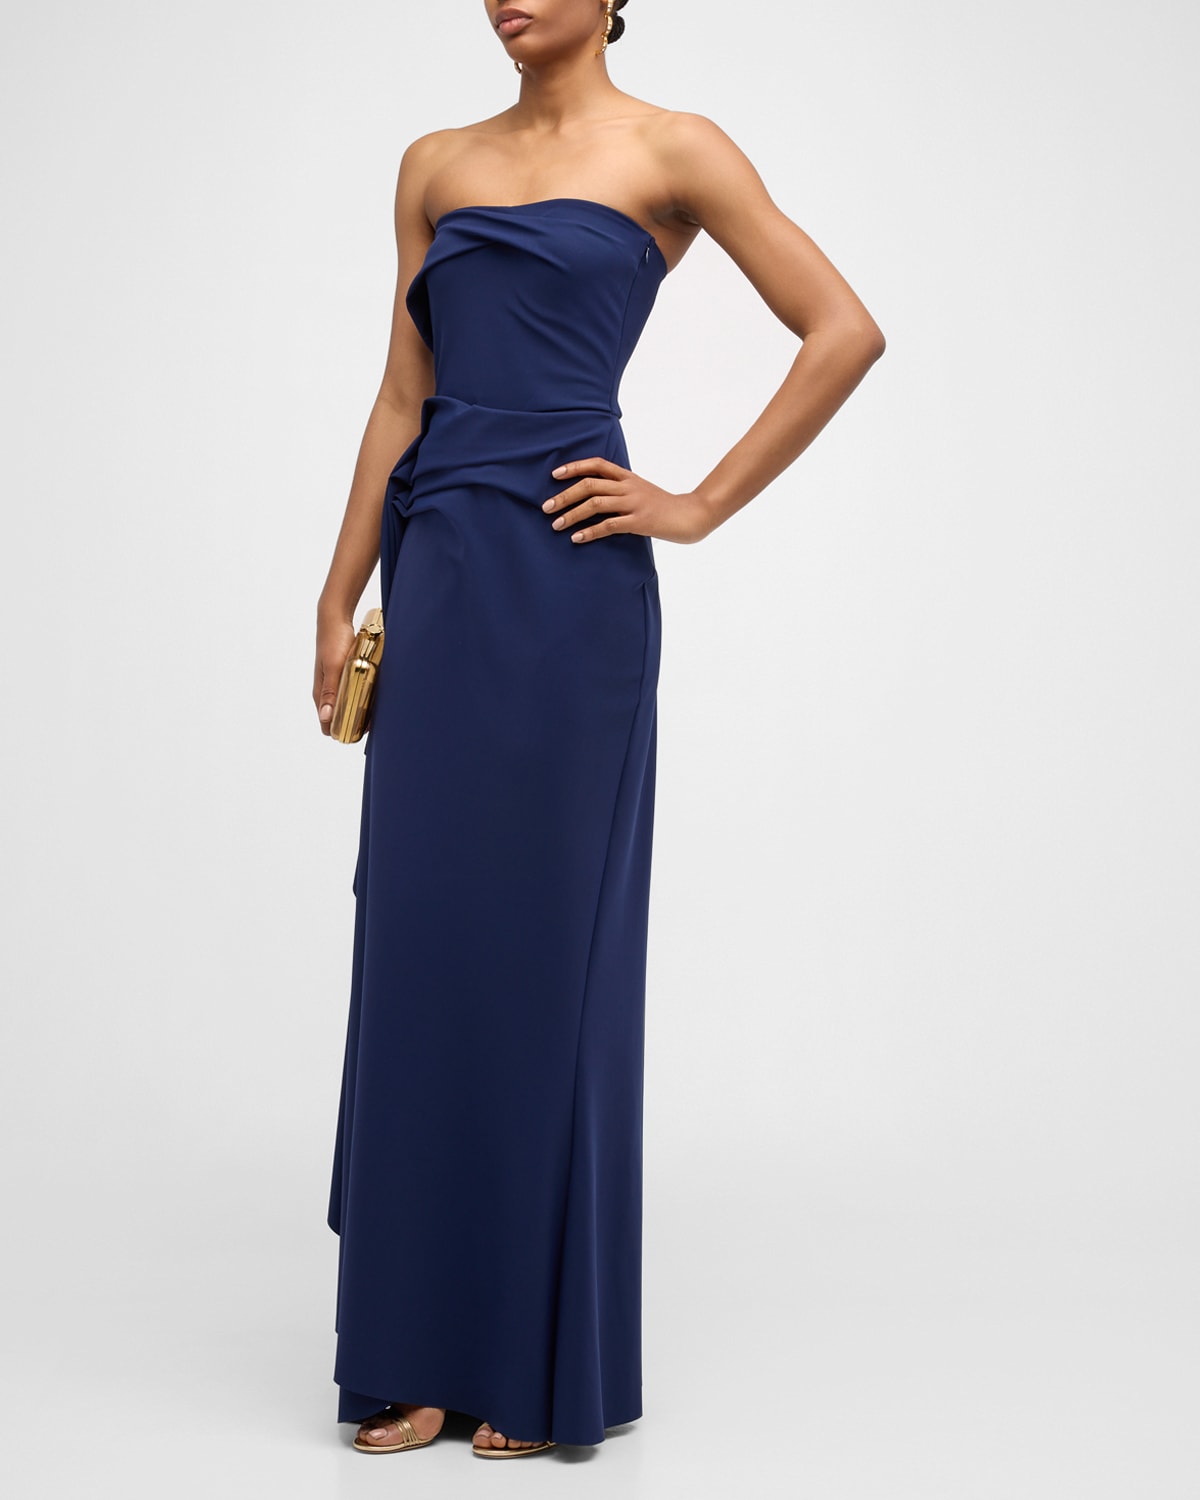 Simone Slim fit Maternity Jean (Denim) - Maternity Wedding Dresses, Evening  Wear and Party Clothes by Tiffany Rose